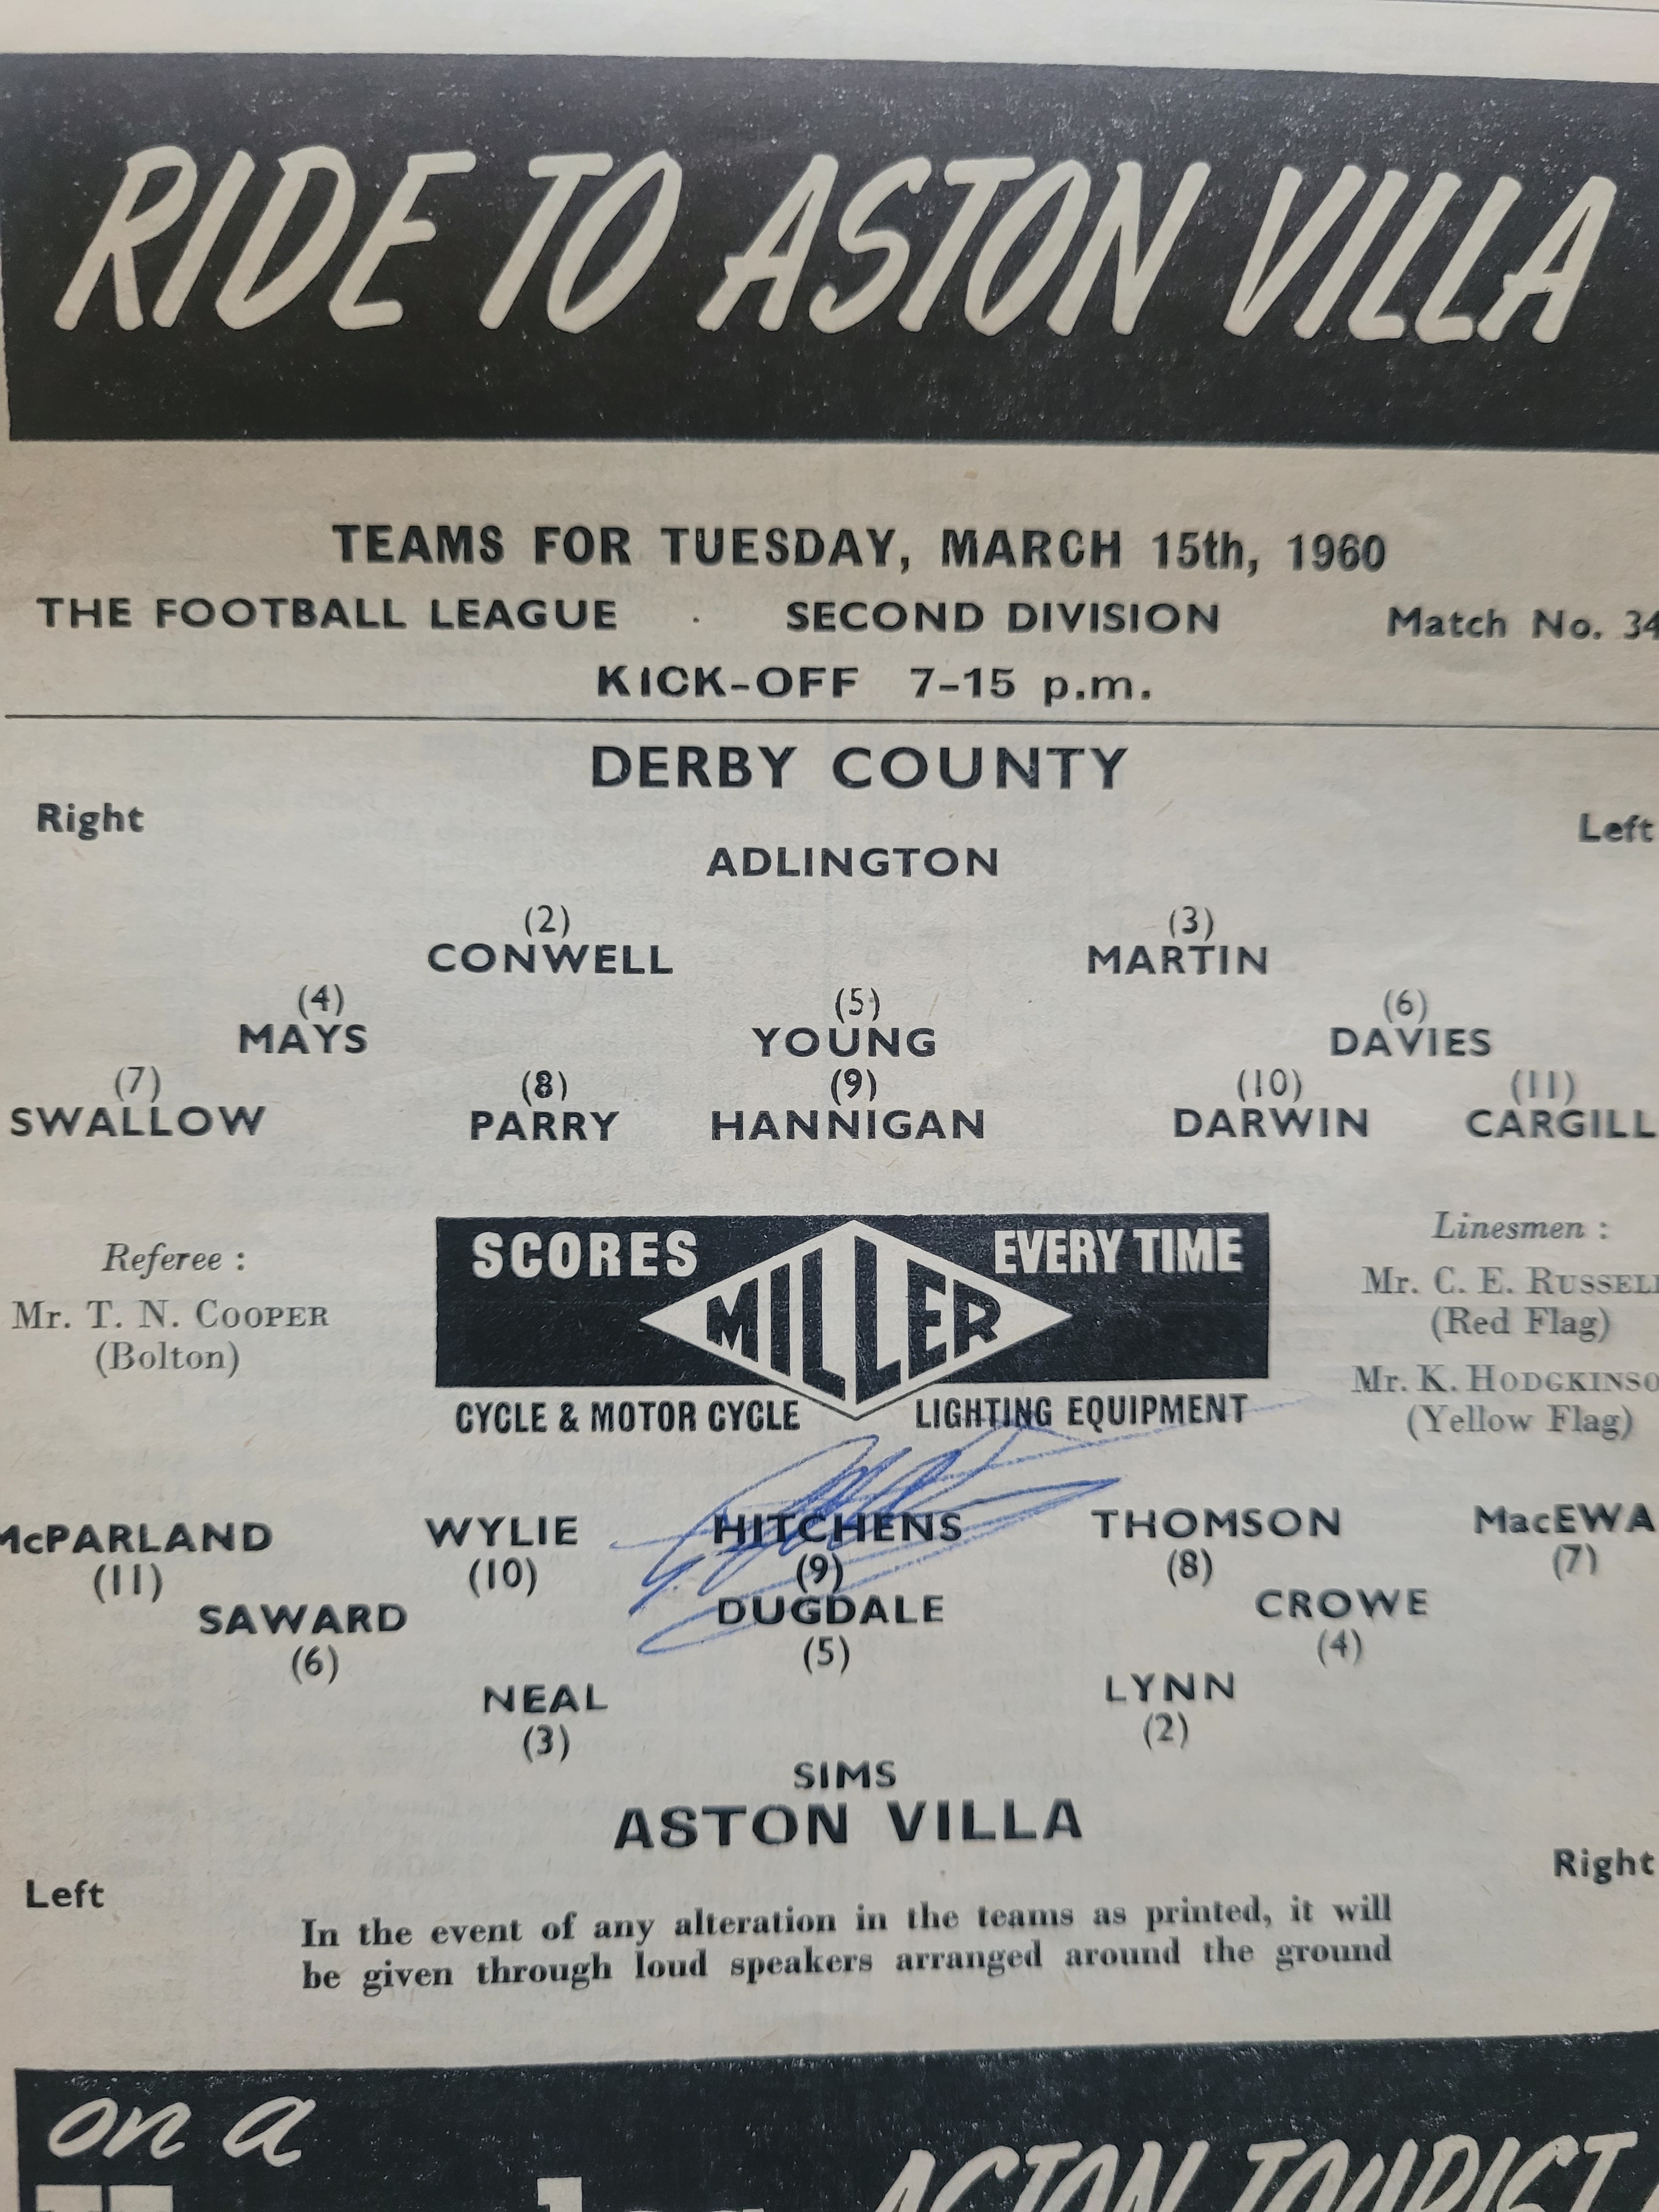 1959-60 ASTON VILLA V DERBY COUNTY AUTOGRAPHED BY GERRY HITCHENS - Image 2 of 2